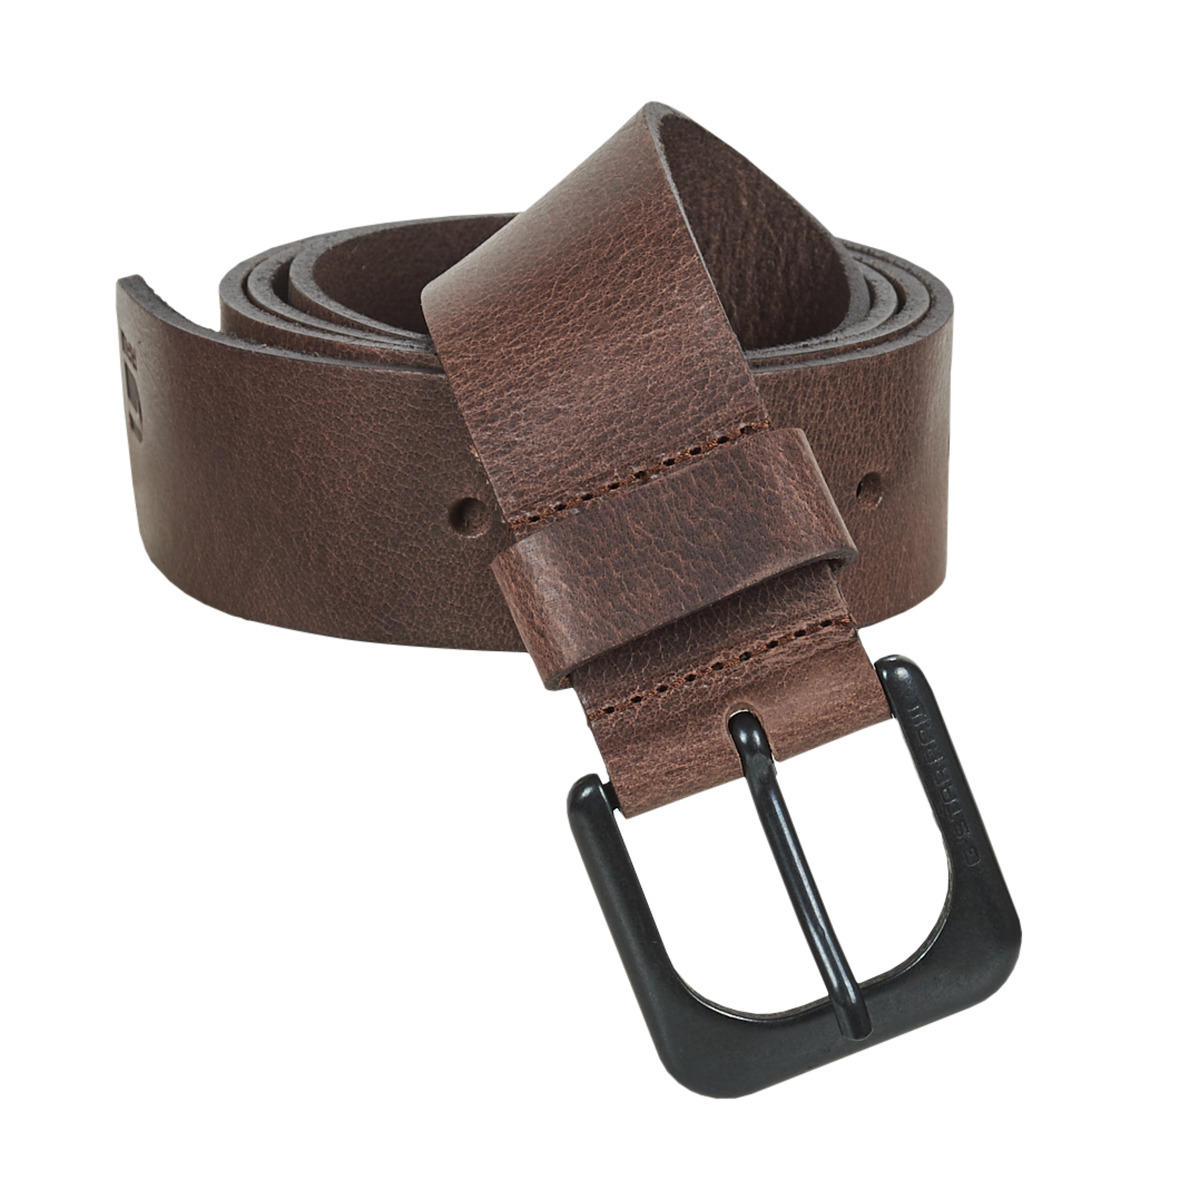 G-Star Raw ZED Men Clothes £ Free - Brown Spartoo UK accessories | - delivery ! Belts